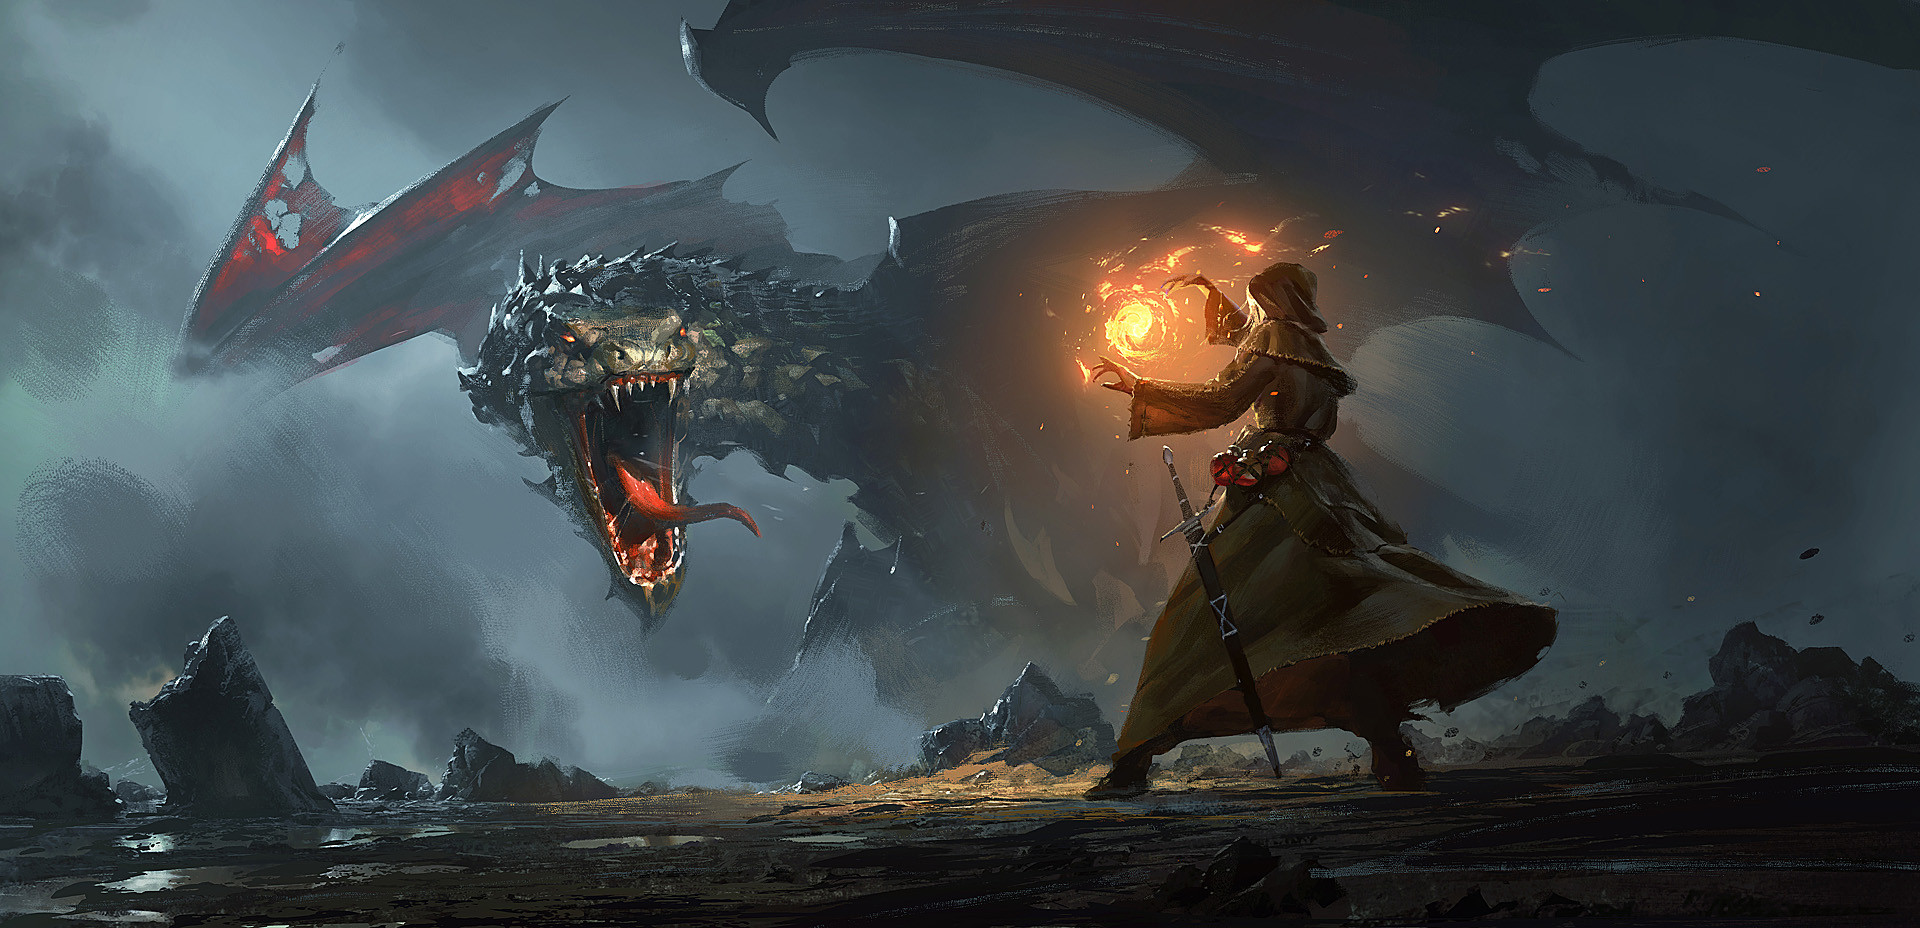 wizard with sword confronts a dragon